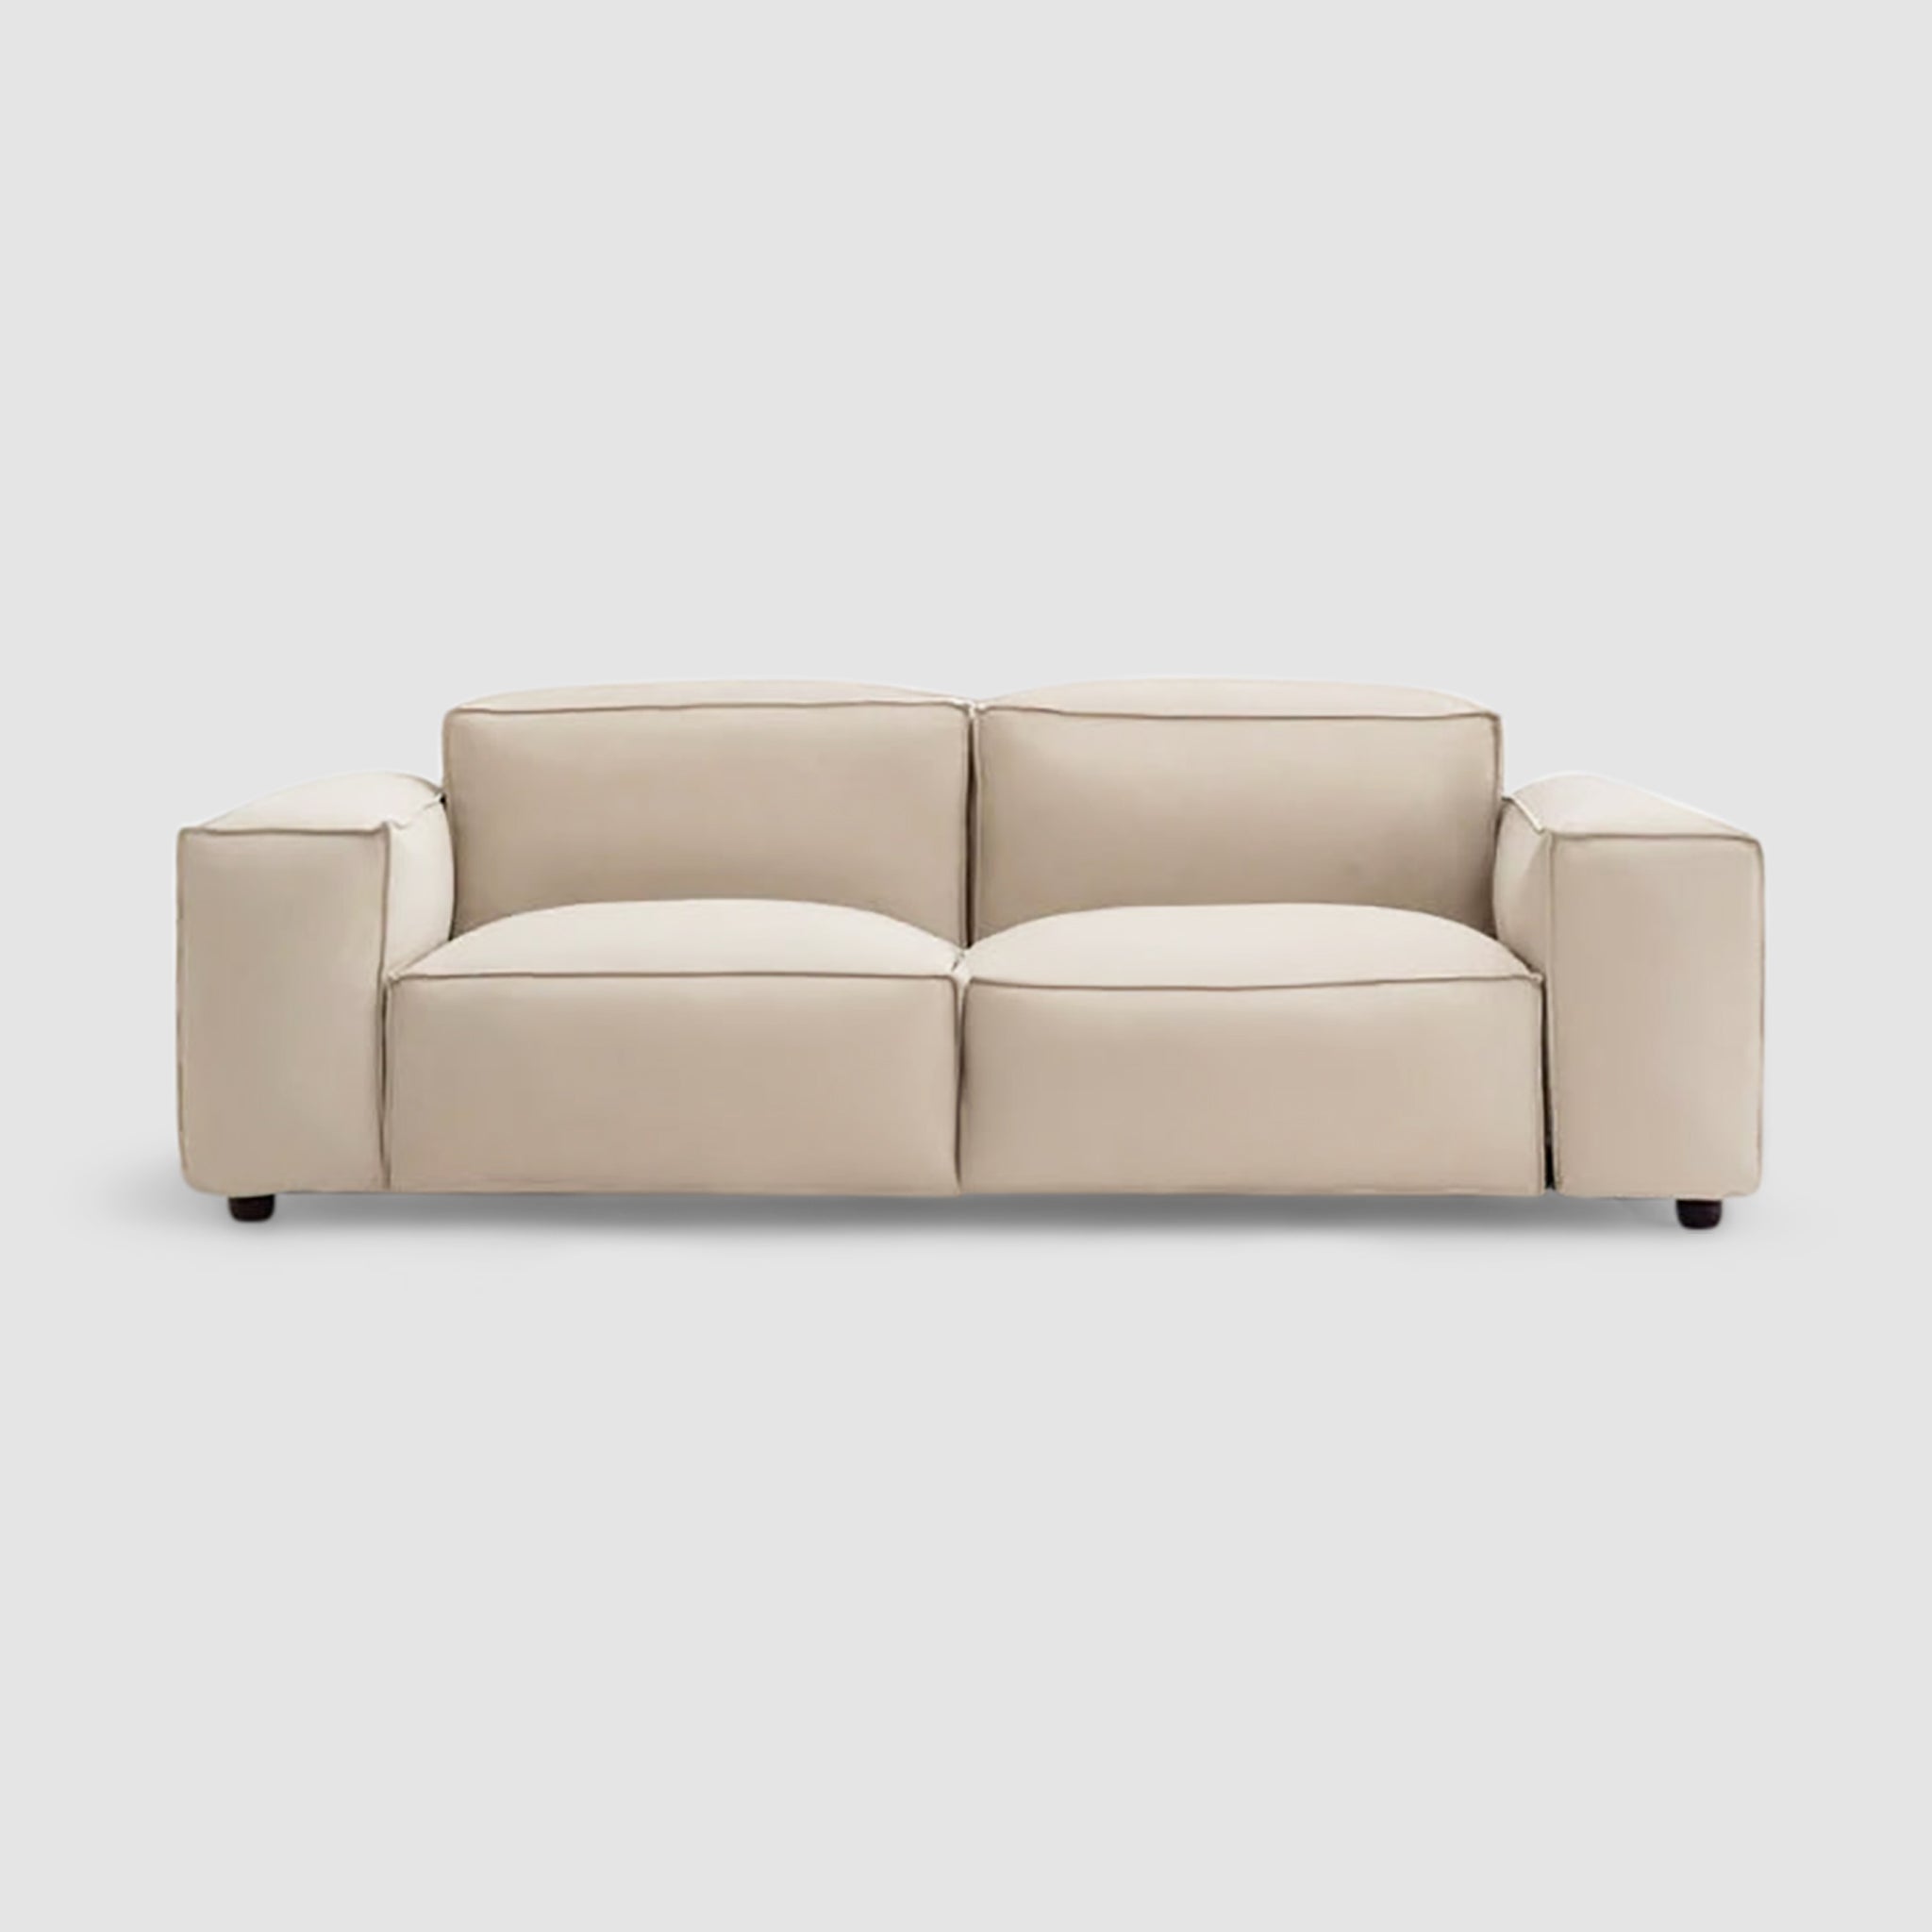 Damien Outdoor Couch-A close-up of a beige couch with a simple design.